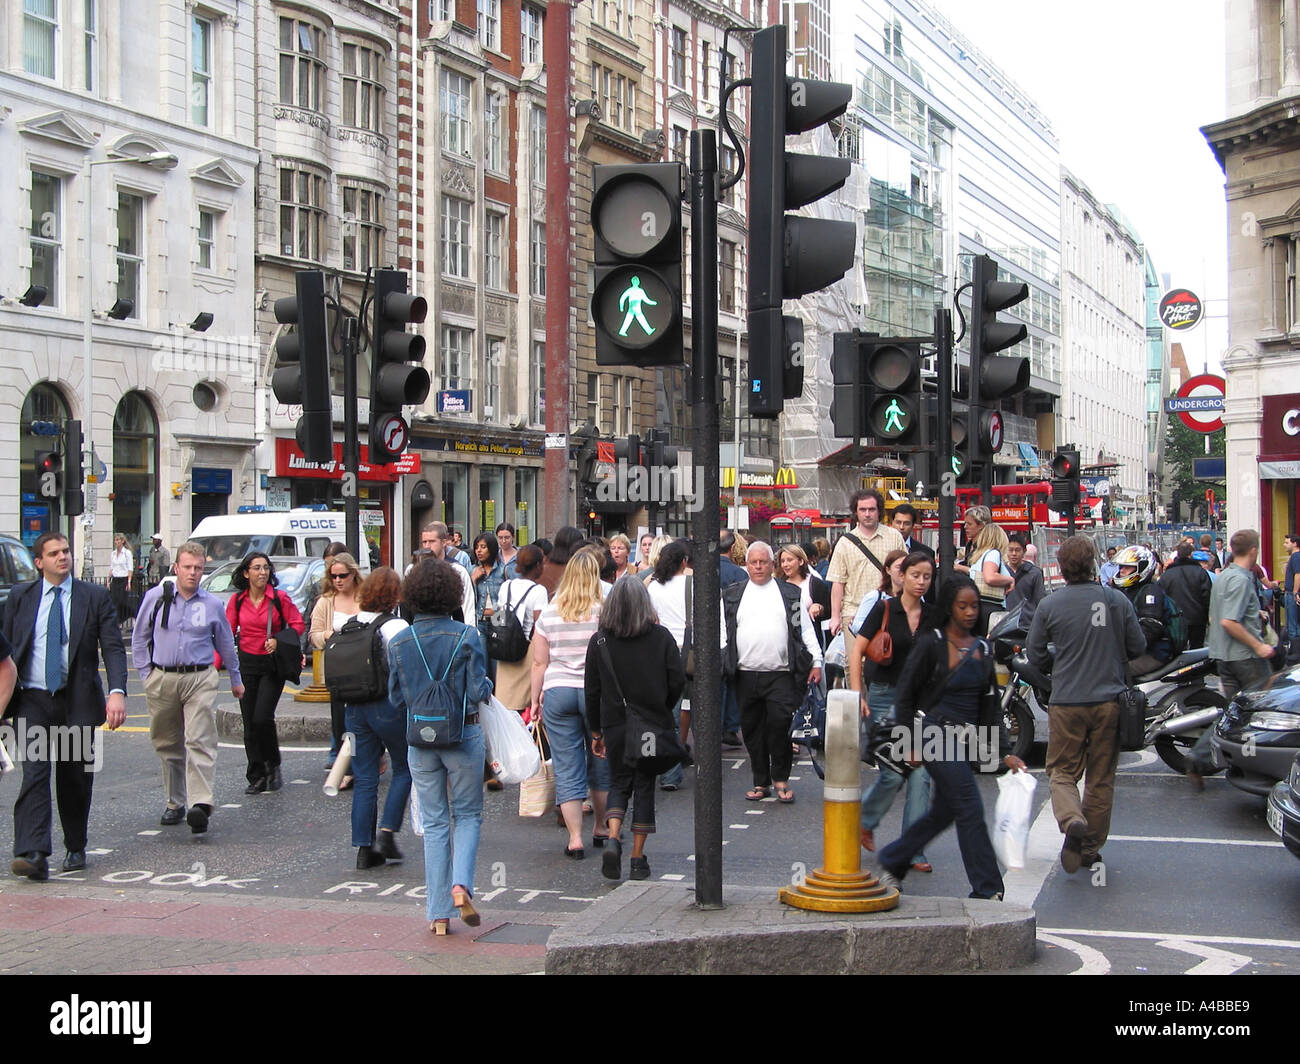 Typical Busy Street Scene Pedestrians High Holborn London England Great Britain Stock Photo